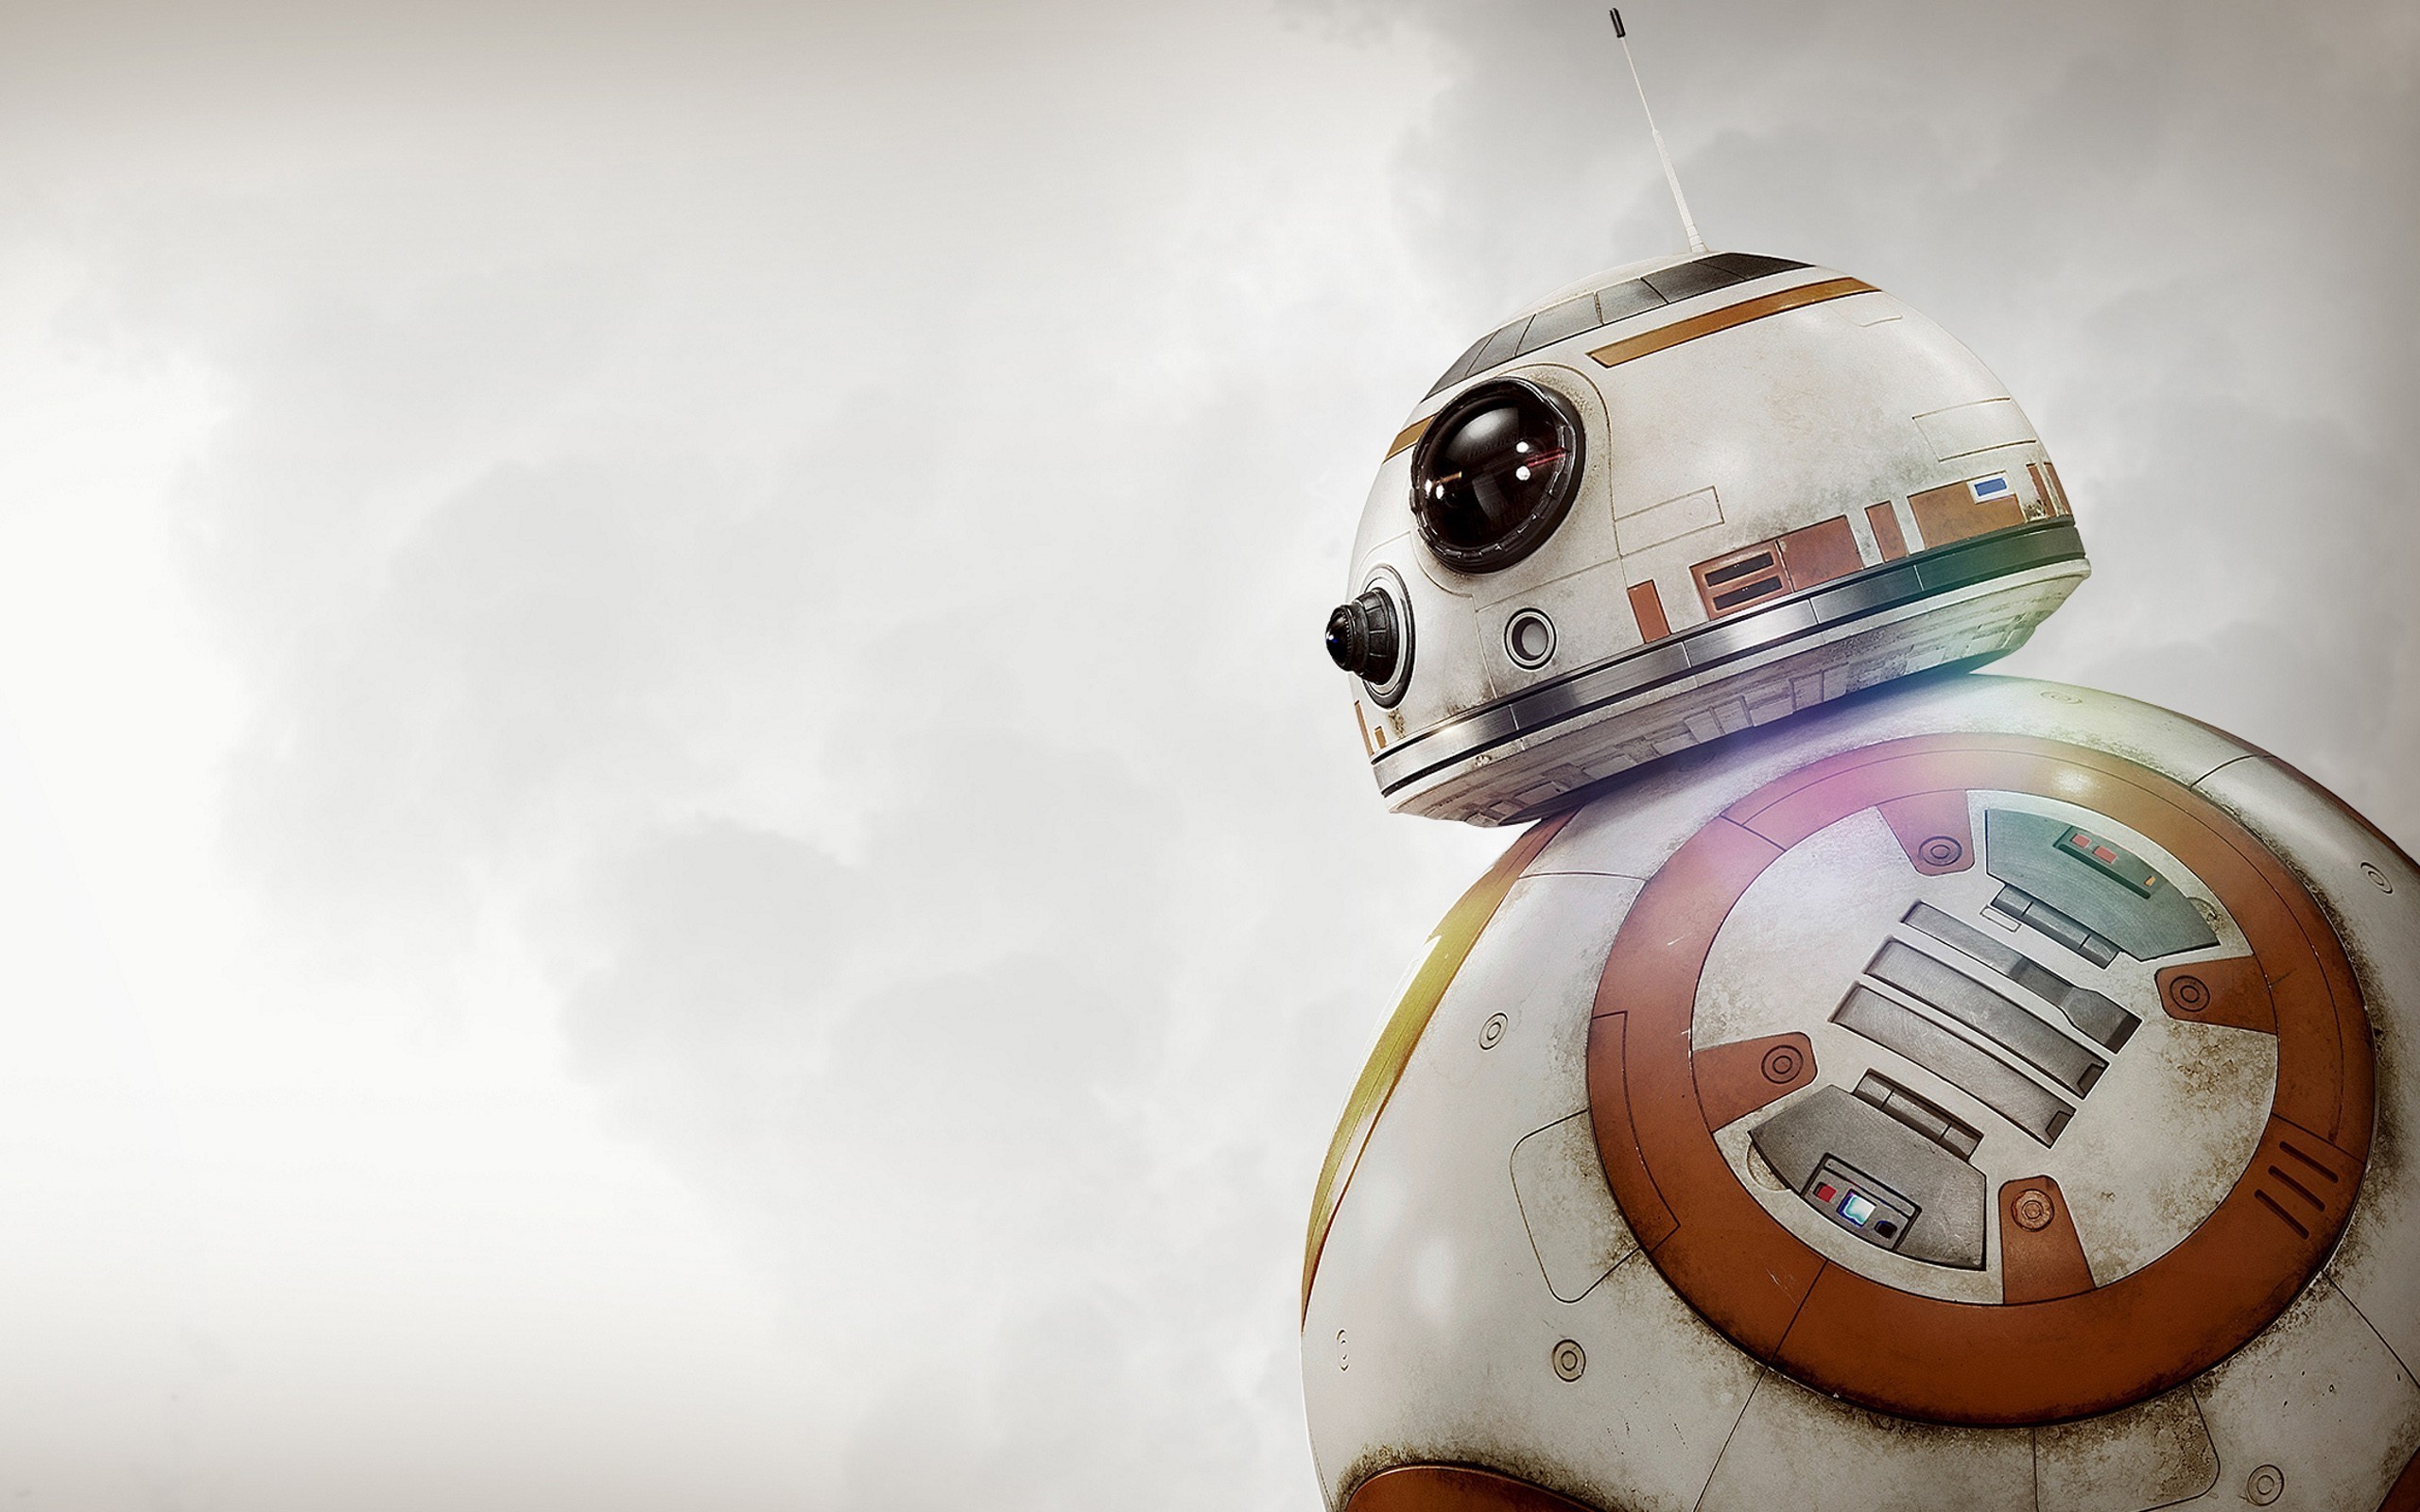 2560x1600 ... BB-8 Phone and PC wallpapers - Album on Imgur ...